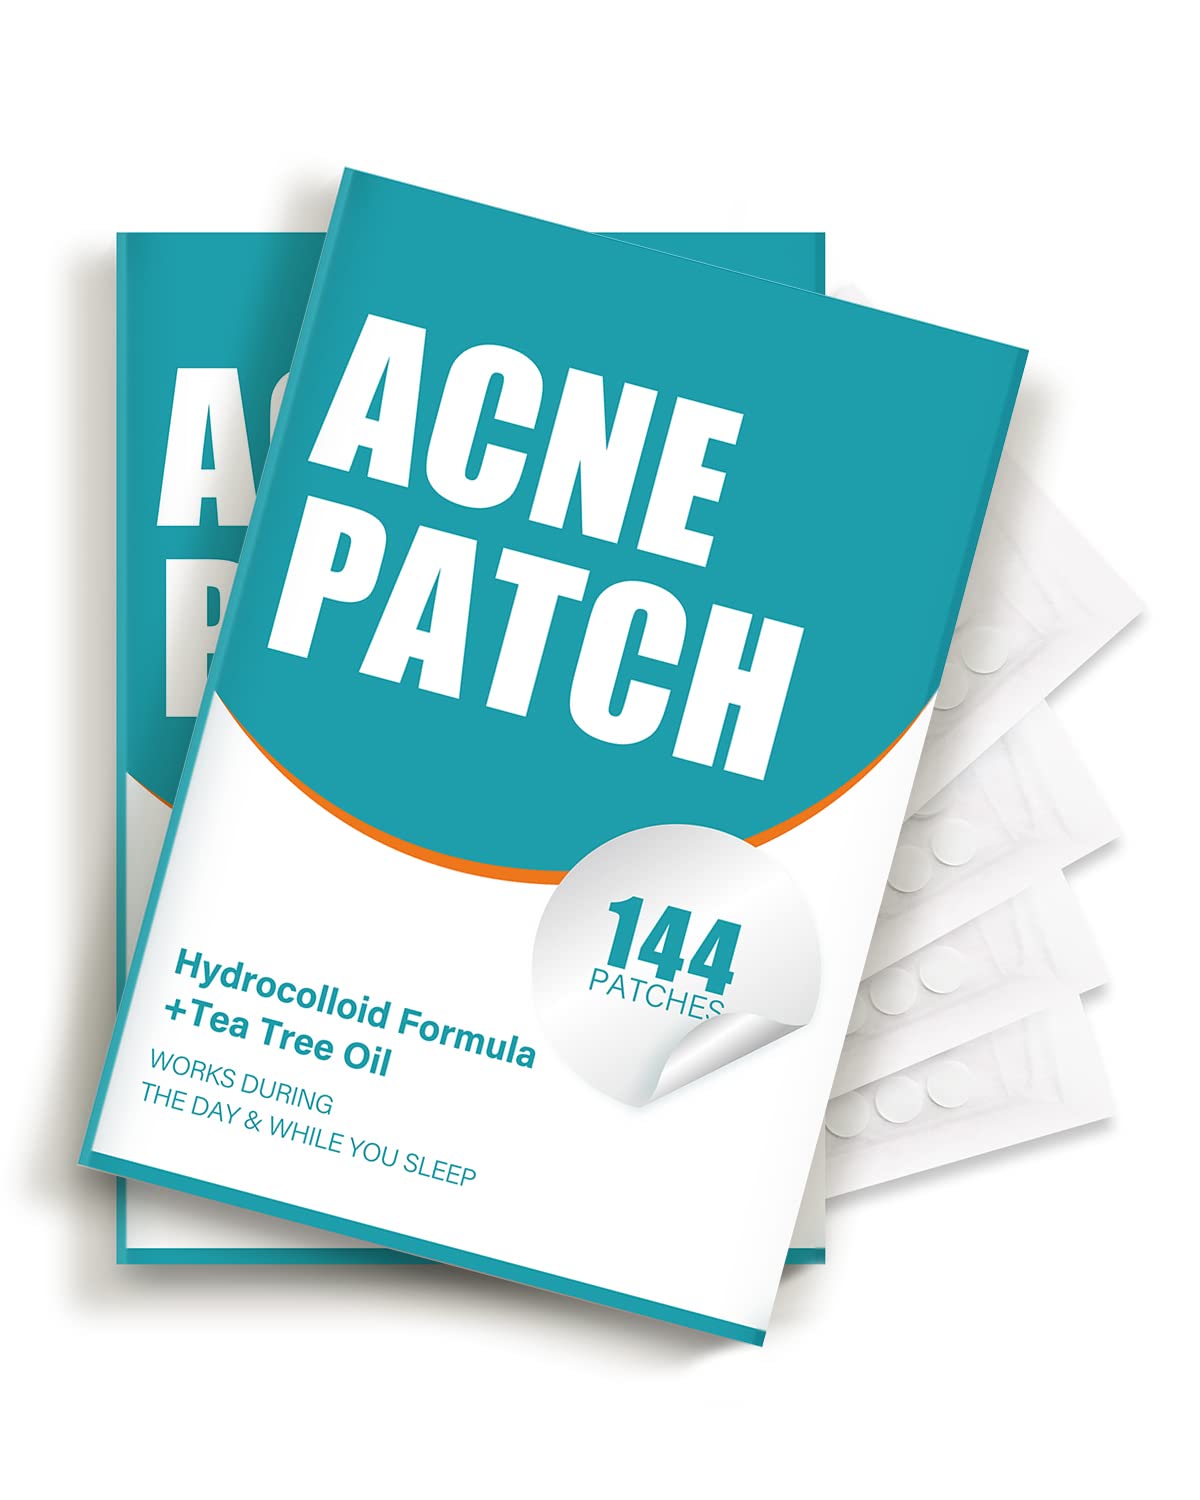 HeroLabs Acne Pimple Patch